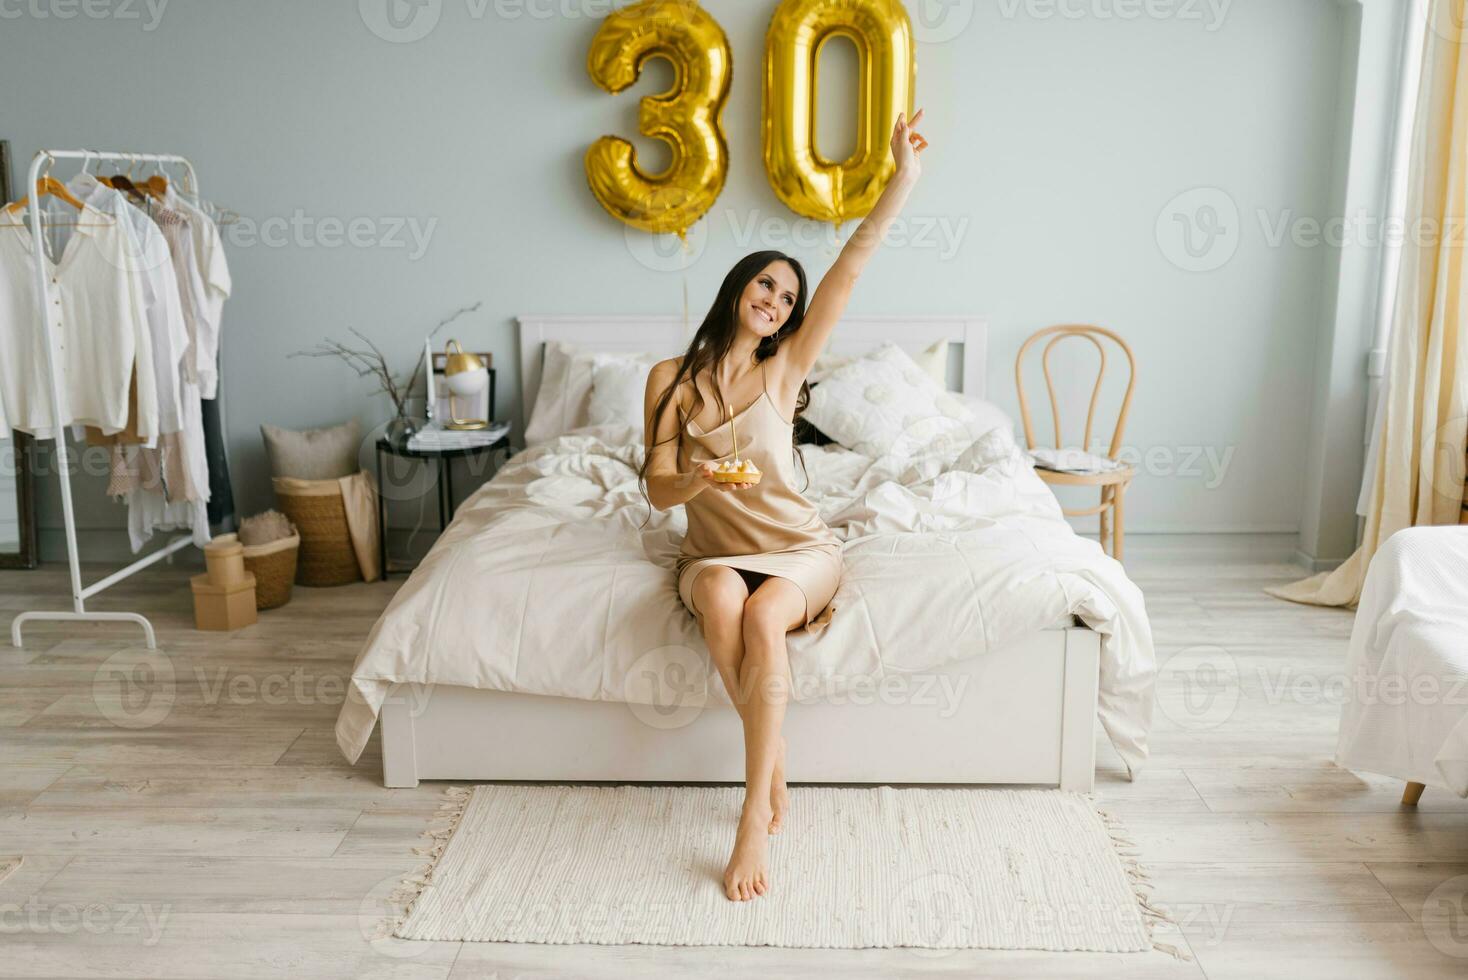 Cute woman with long hair is sitting on a bed in a cozy bedroom at home with a cake on a plate and a candle and celebrating her birthday photo